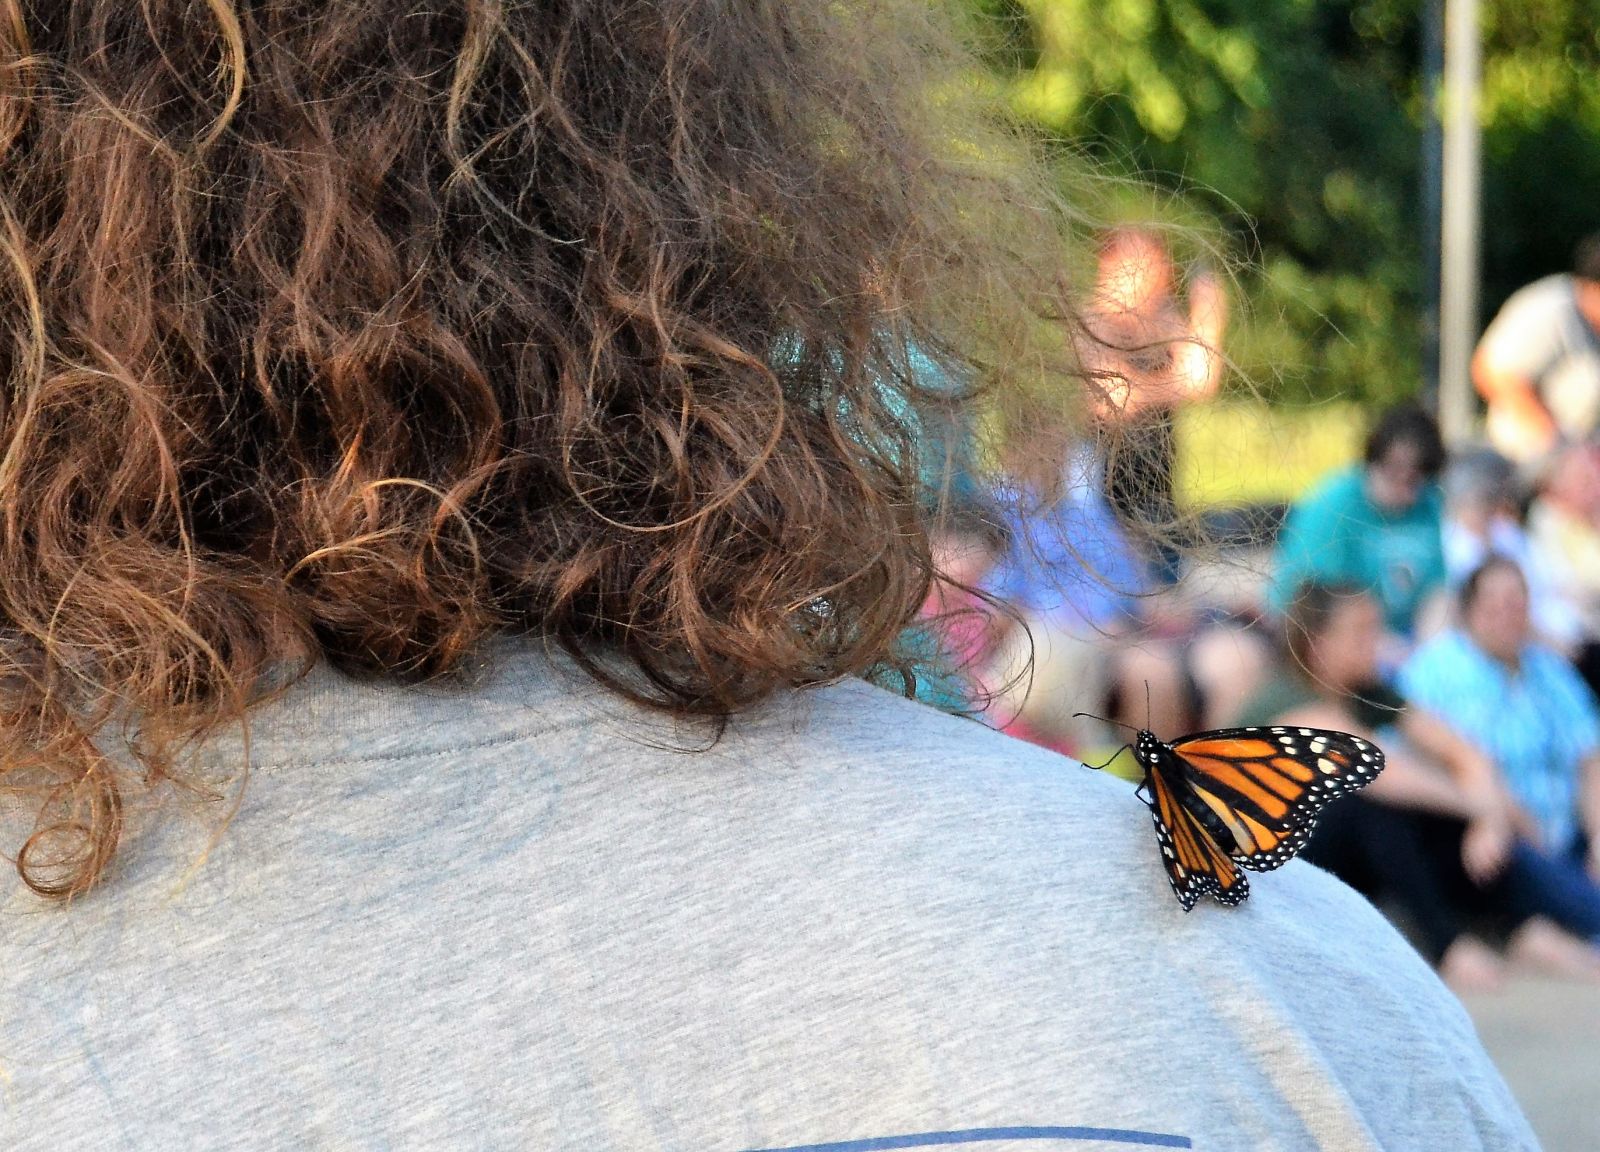 A butterfly alights on the shoulder of an attendee at Thursday's Cathy B. Novinger Butterfly Release for Ovarian Cancer at the Statehouse. (Photo/Travis Boland)